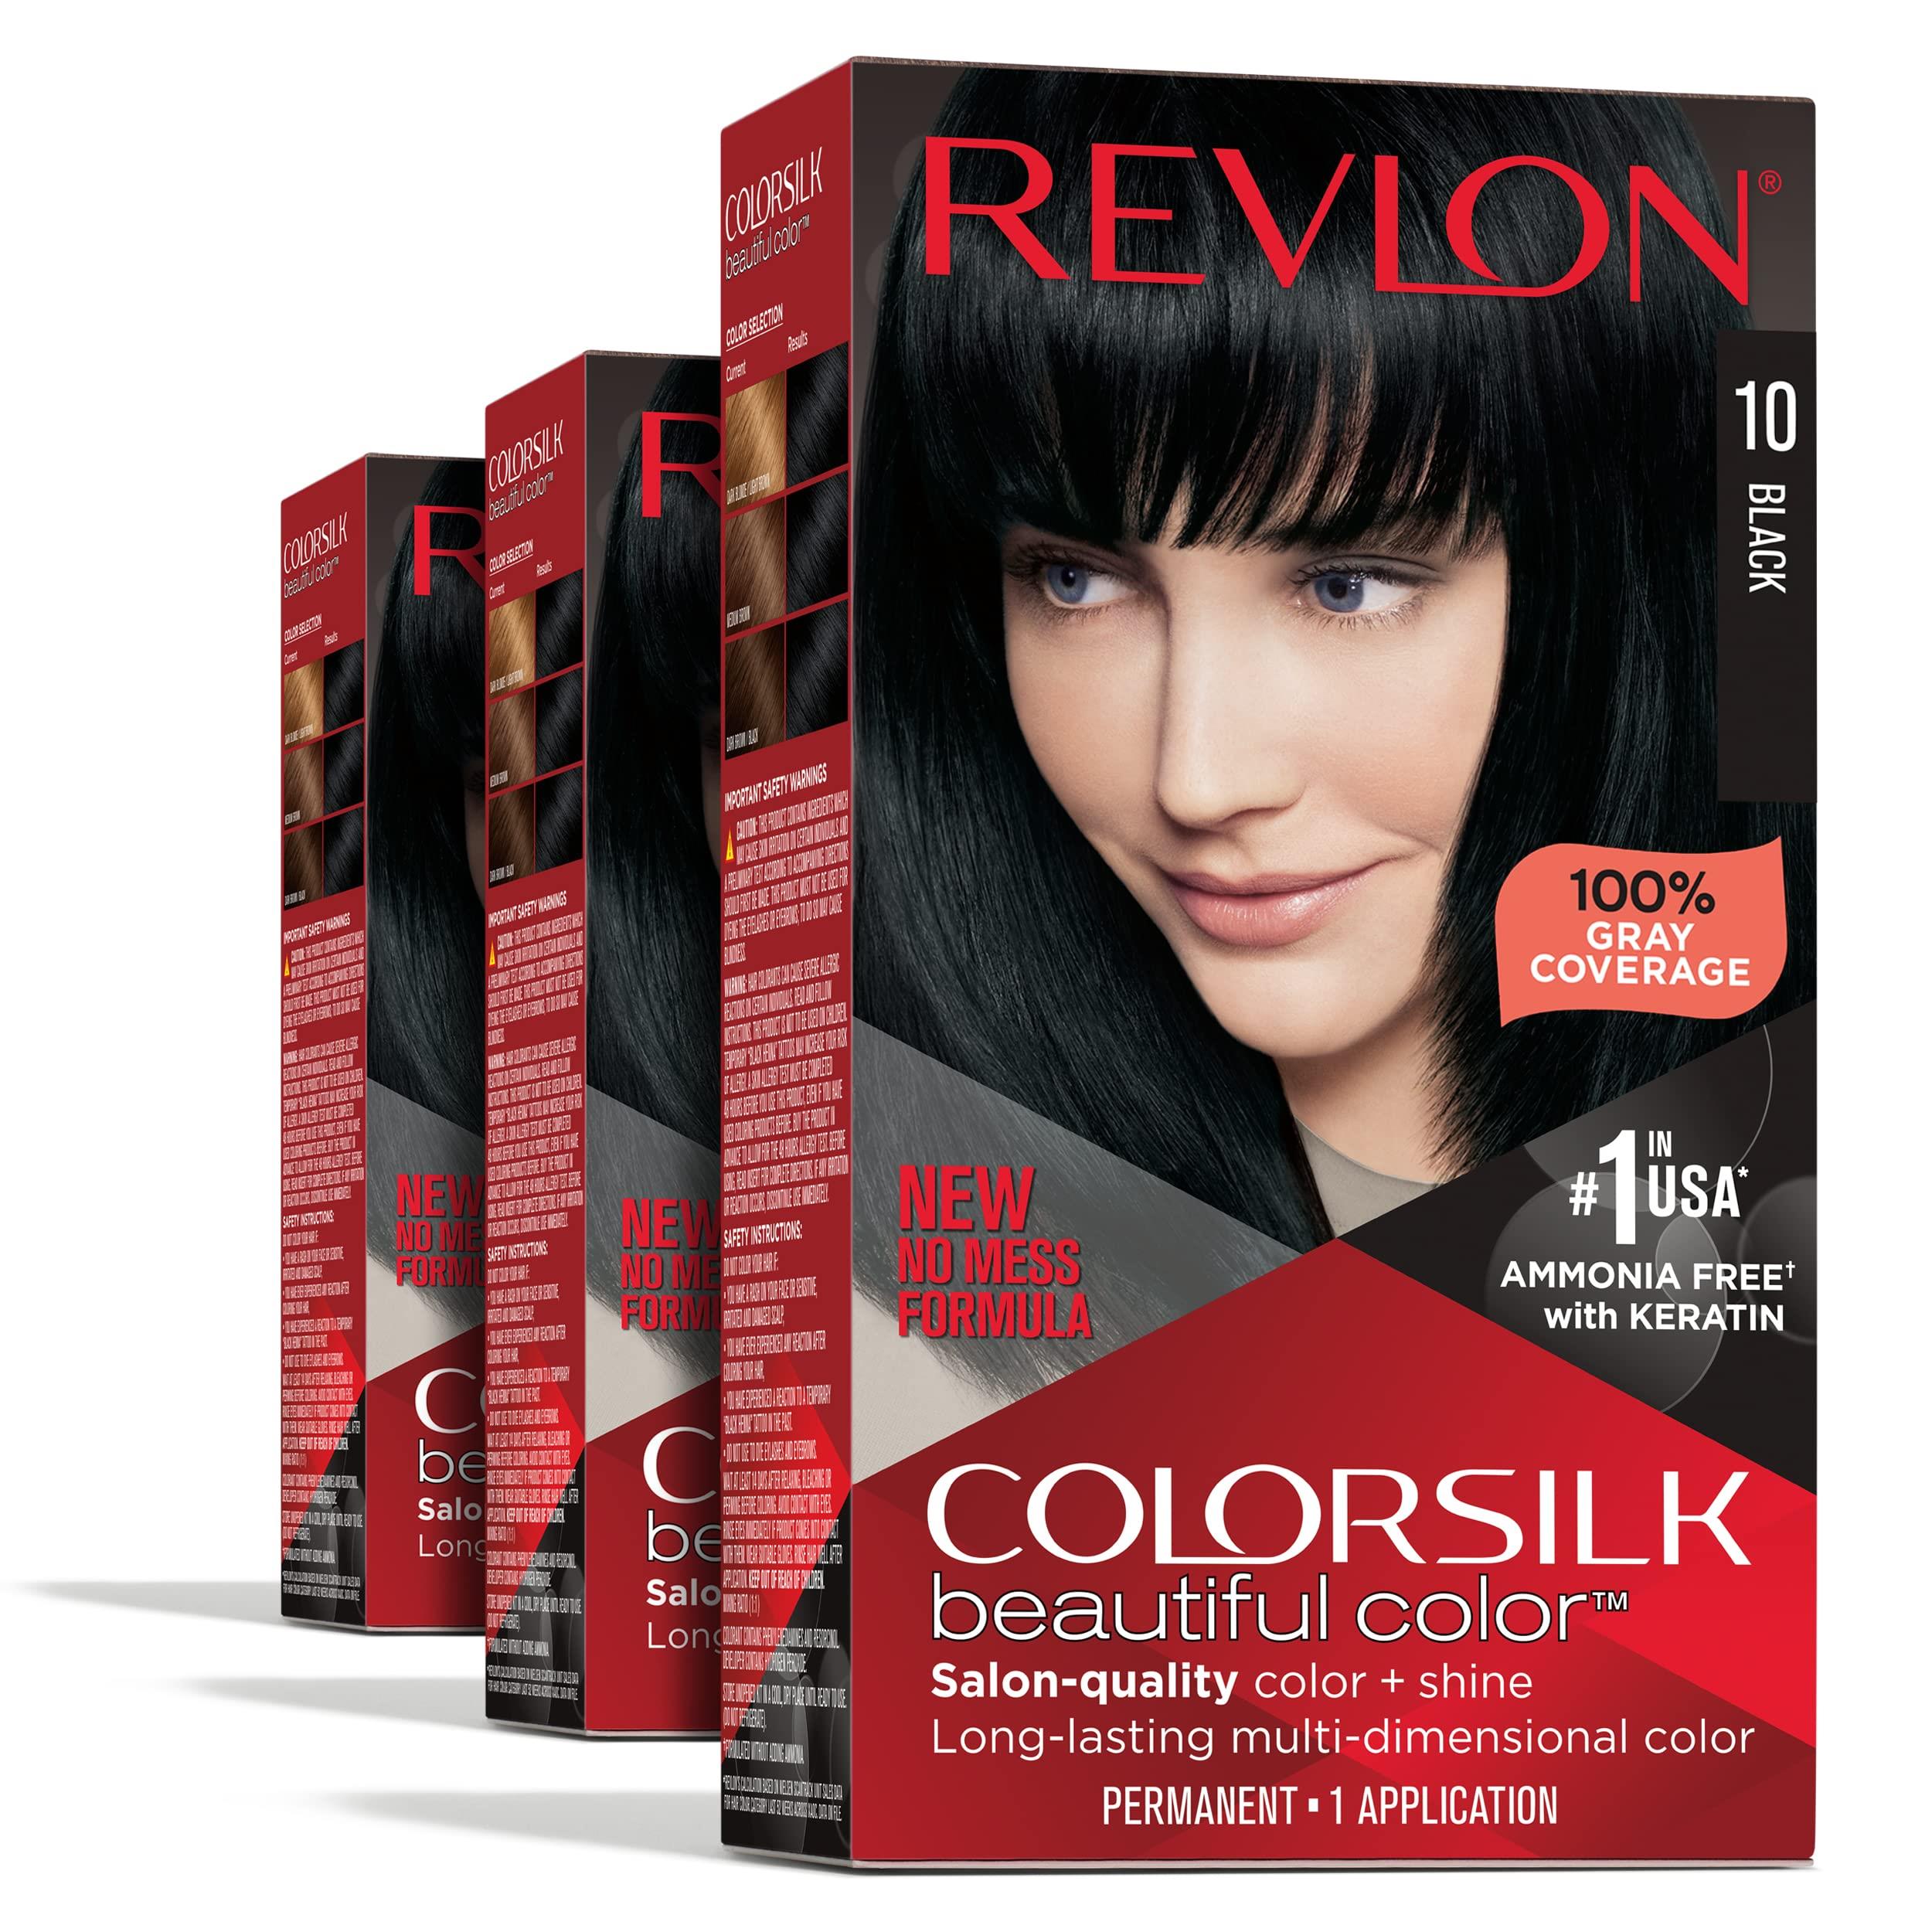 Permanent Hair Color by Revlon, Permanent Hair Dye, Colorsilk with 100% Gray Coverage, Ammonia-Free, Keratin and Amino Acids, 10 Black, 4.4 Oz (Pack of 3)